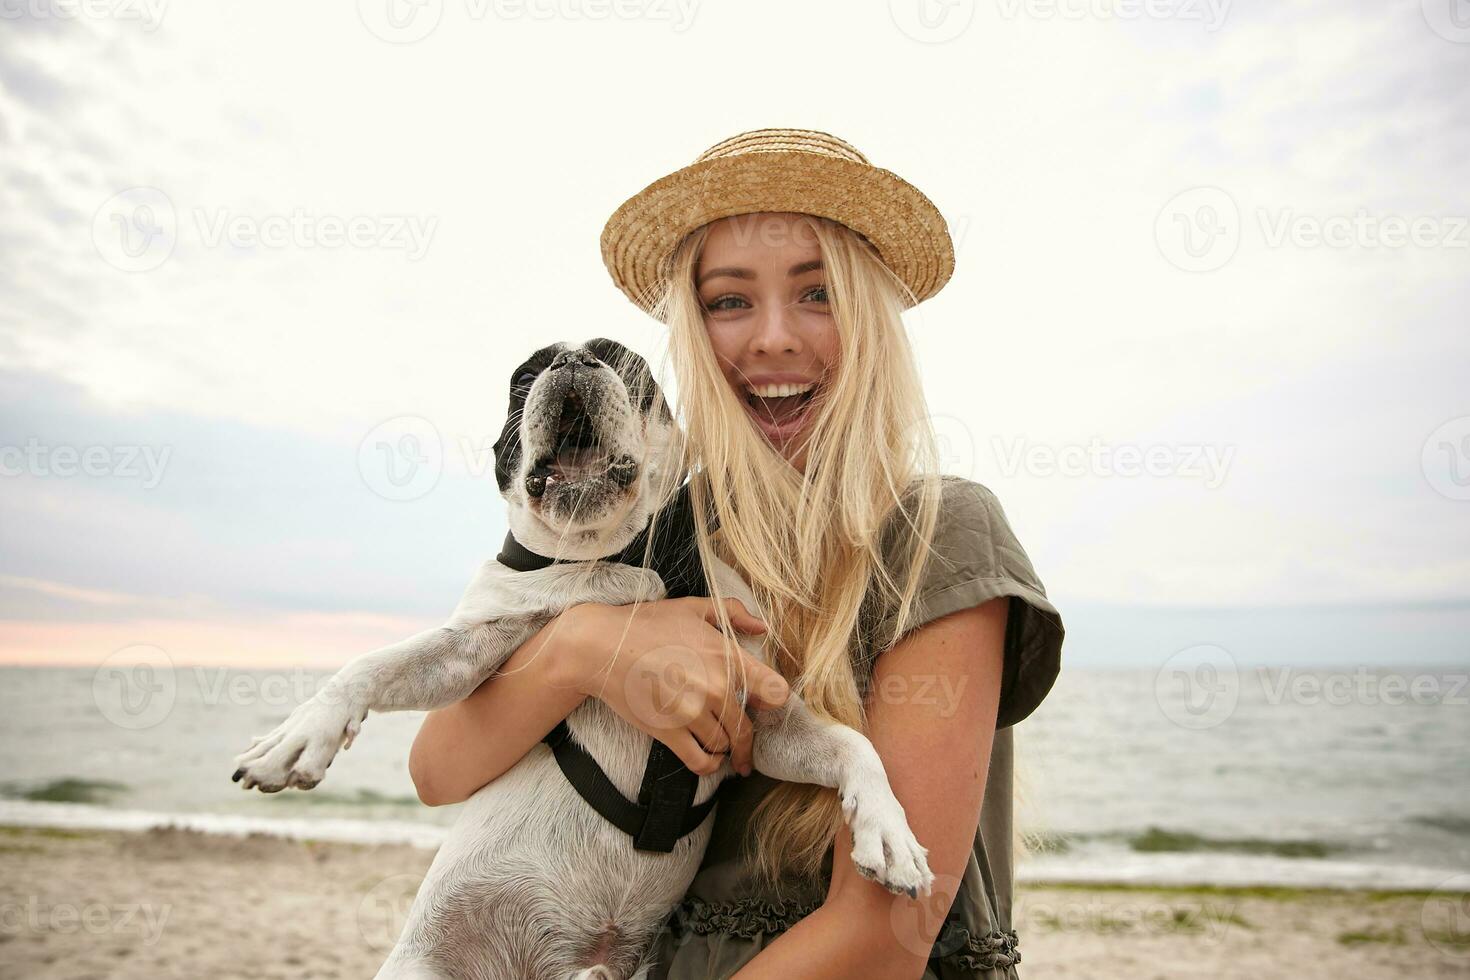 Funny shot of beautiful young woman with long blonde hair wearing casual clothes, walking along beach on overcast with her dog, looking at camera joyfully and smiling widely photo